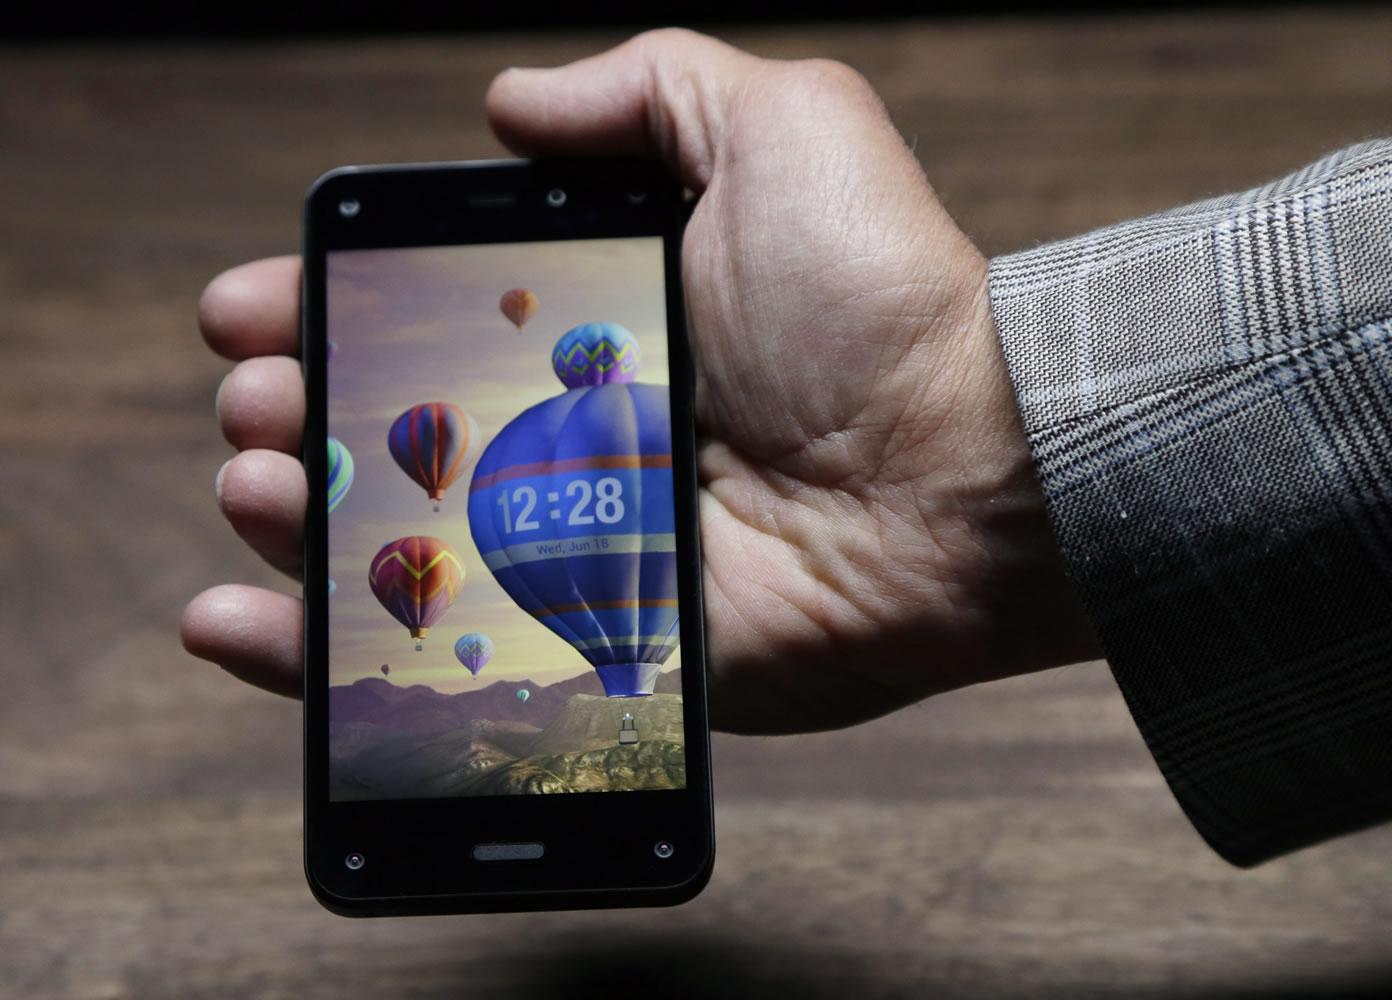 The new Amazon Fire Phone displays a dynamic perspective effect lock screen image.